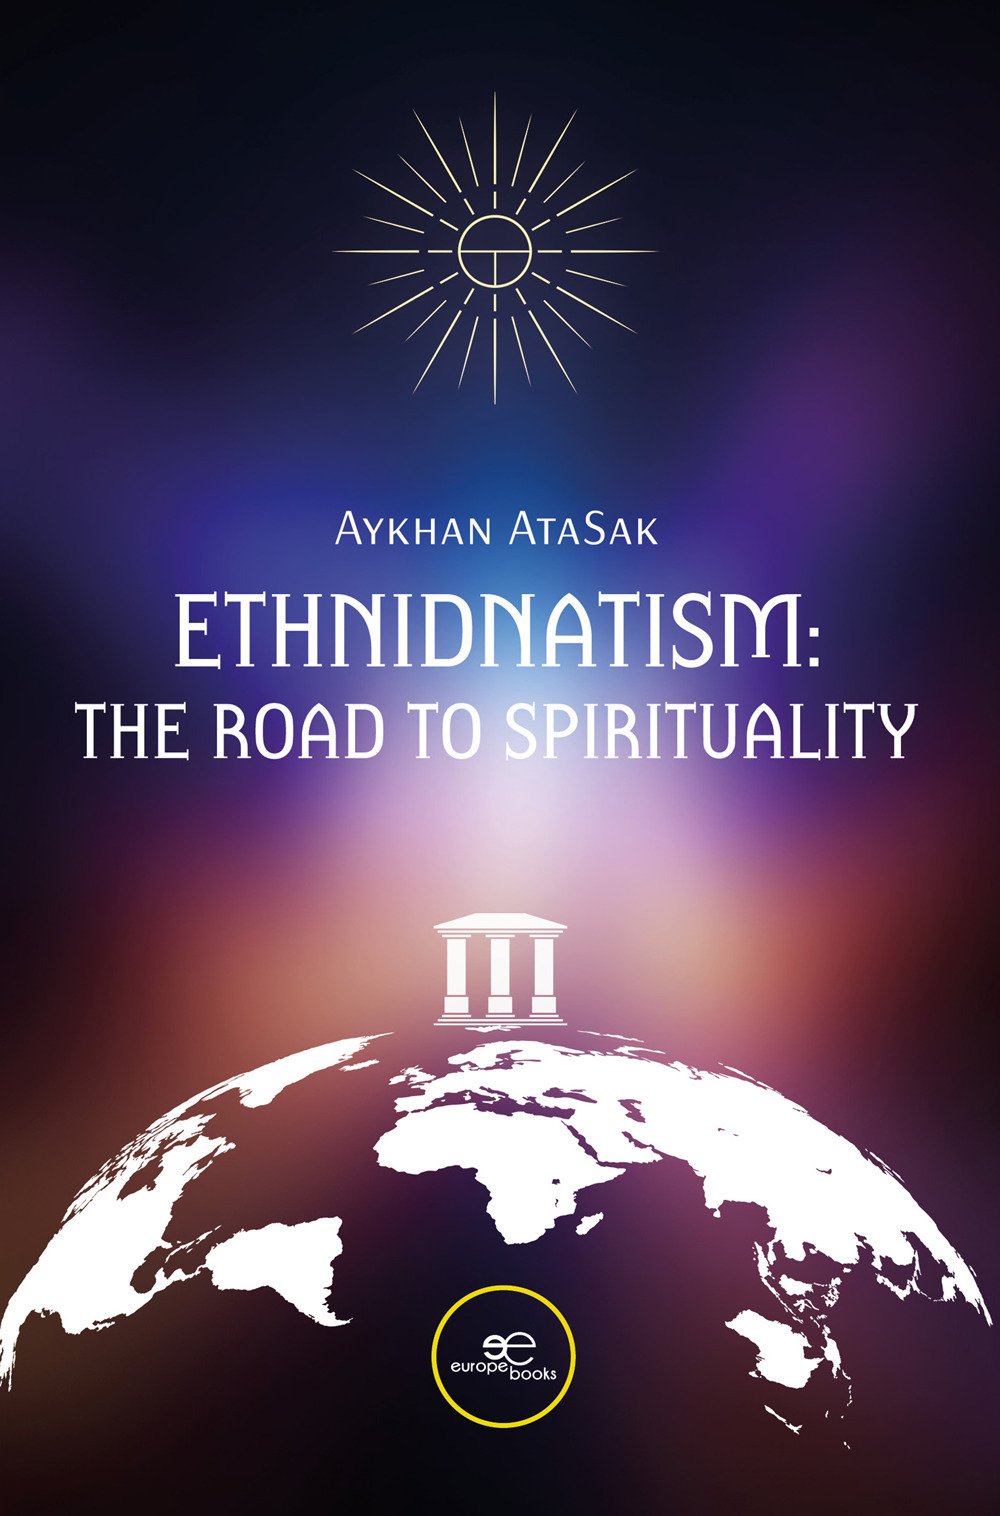 Ethnidnatism: the road to spirituality